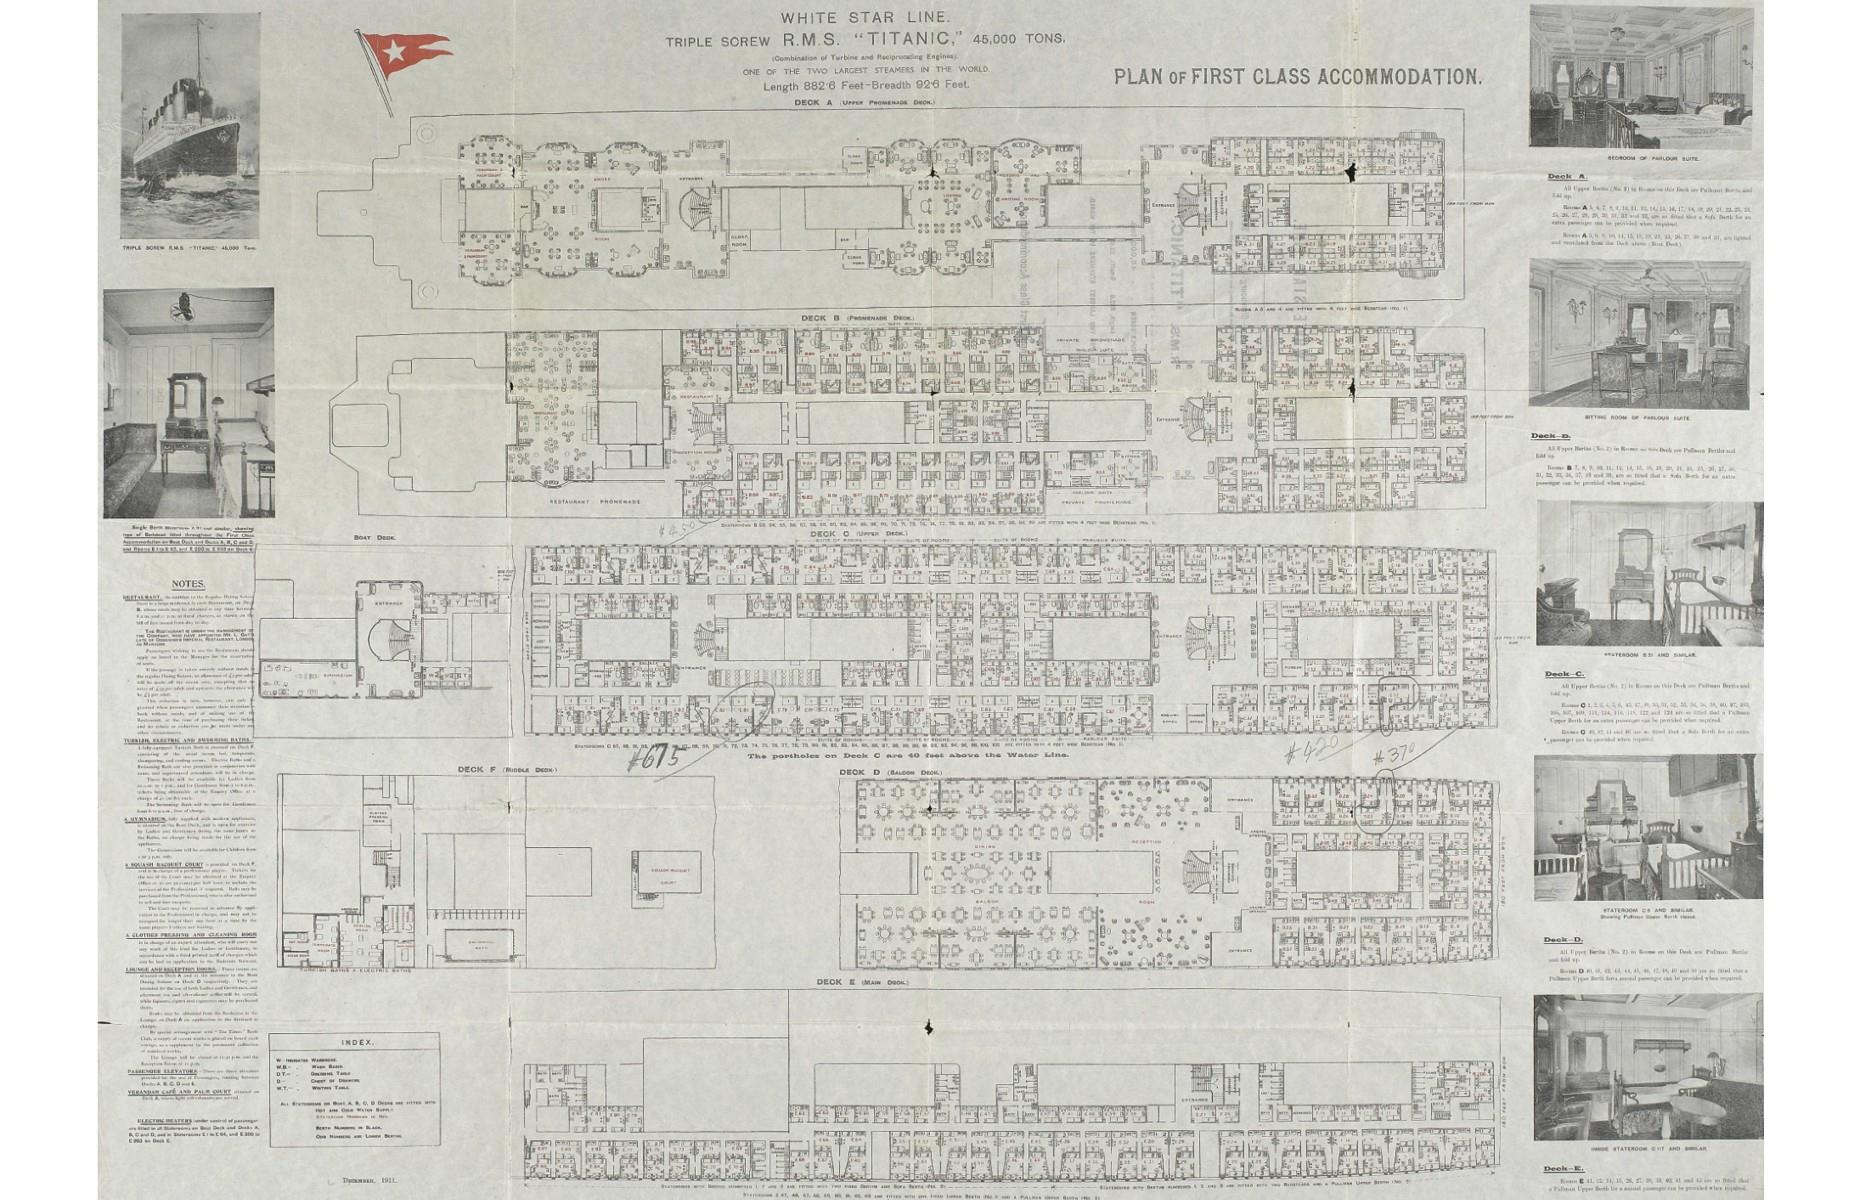 <p>On boarding the RMS Titanic, the wealthiest 324 passengers were given a deck plan to help them navigate their way around the ship. The plan pictured had belonged to wealthy American couple Ida and Isidor Straus, and is believed to be one of only three left in existence. Mr and Mrs Straus died side by side onboard the Titanic, as Ida refused a place on a lifeboat in order to stay with her husband. At the time he was the owner of the Macy’s department store in New York. The couple’s maid Ellen Bird survived, and with her survived the deck plan. Bird kept hold of the fragile document until her death in 1949, and in 2011 it sold at auction for £30,000 ($48.8k). The same buyer also bought a photo of Mr Straus for £17,000 ($27.7k).</p>